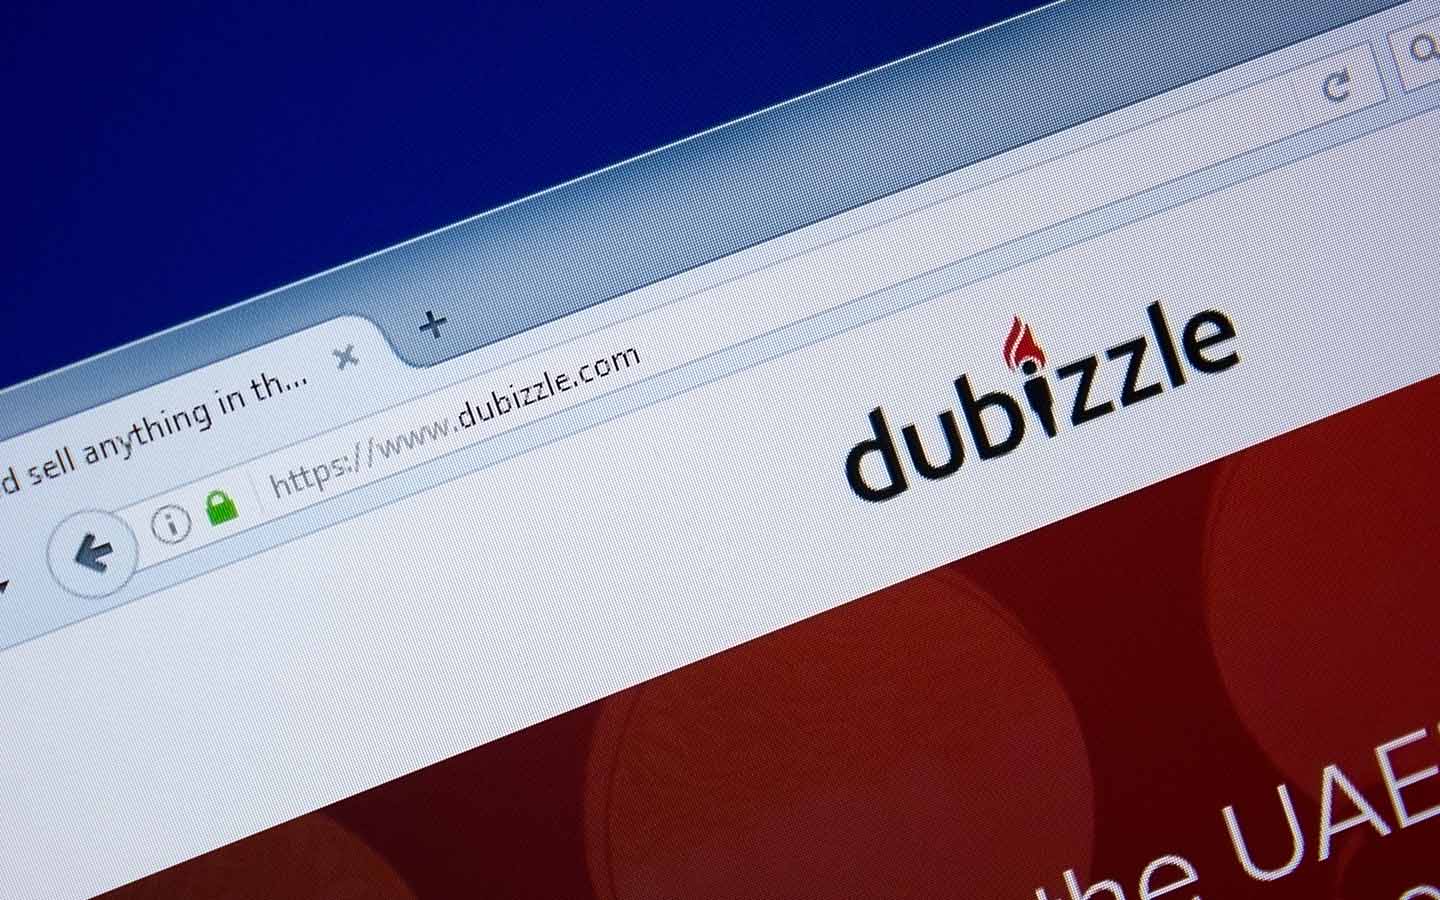 Use the dubizzle platform to sell your car